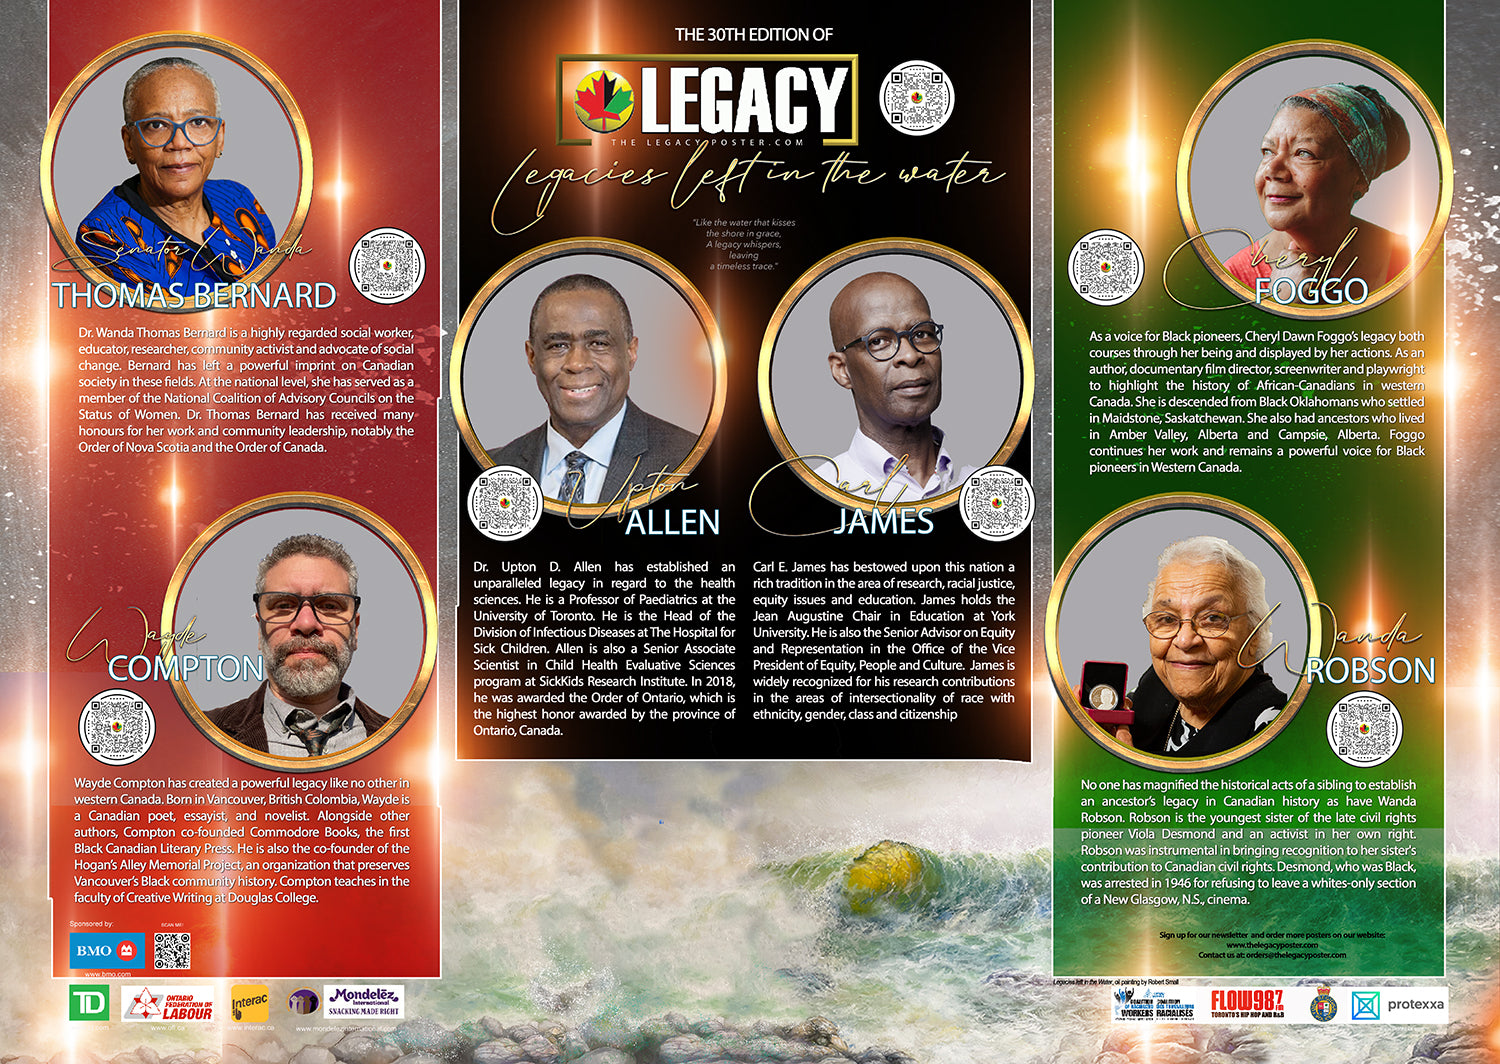 LEGACY 2024: Legacies in the water! (30th Anniversary) Pre-order now! - The LEGACY Collexion